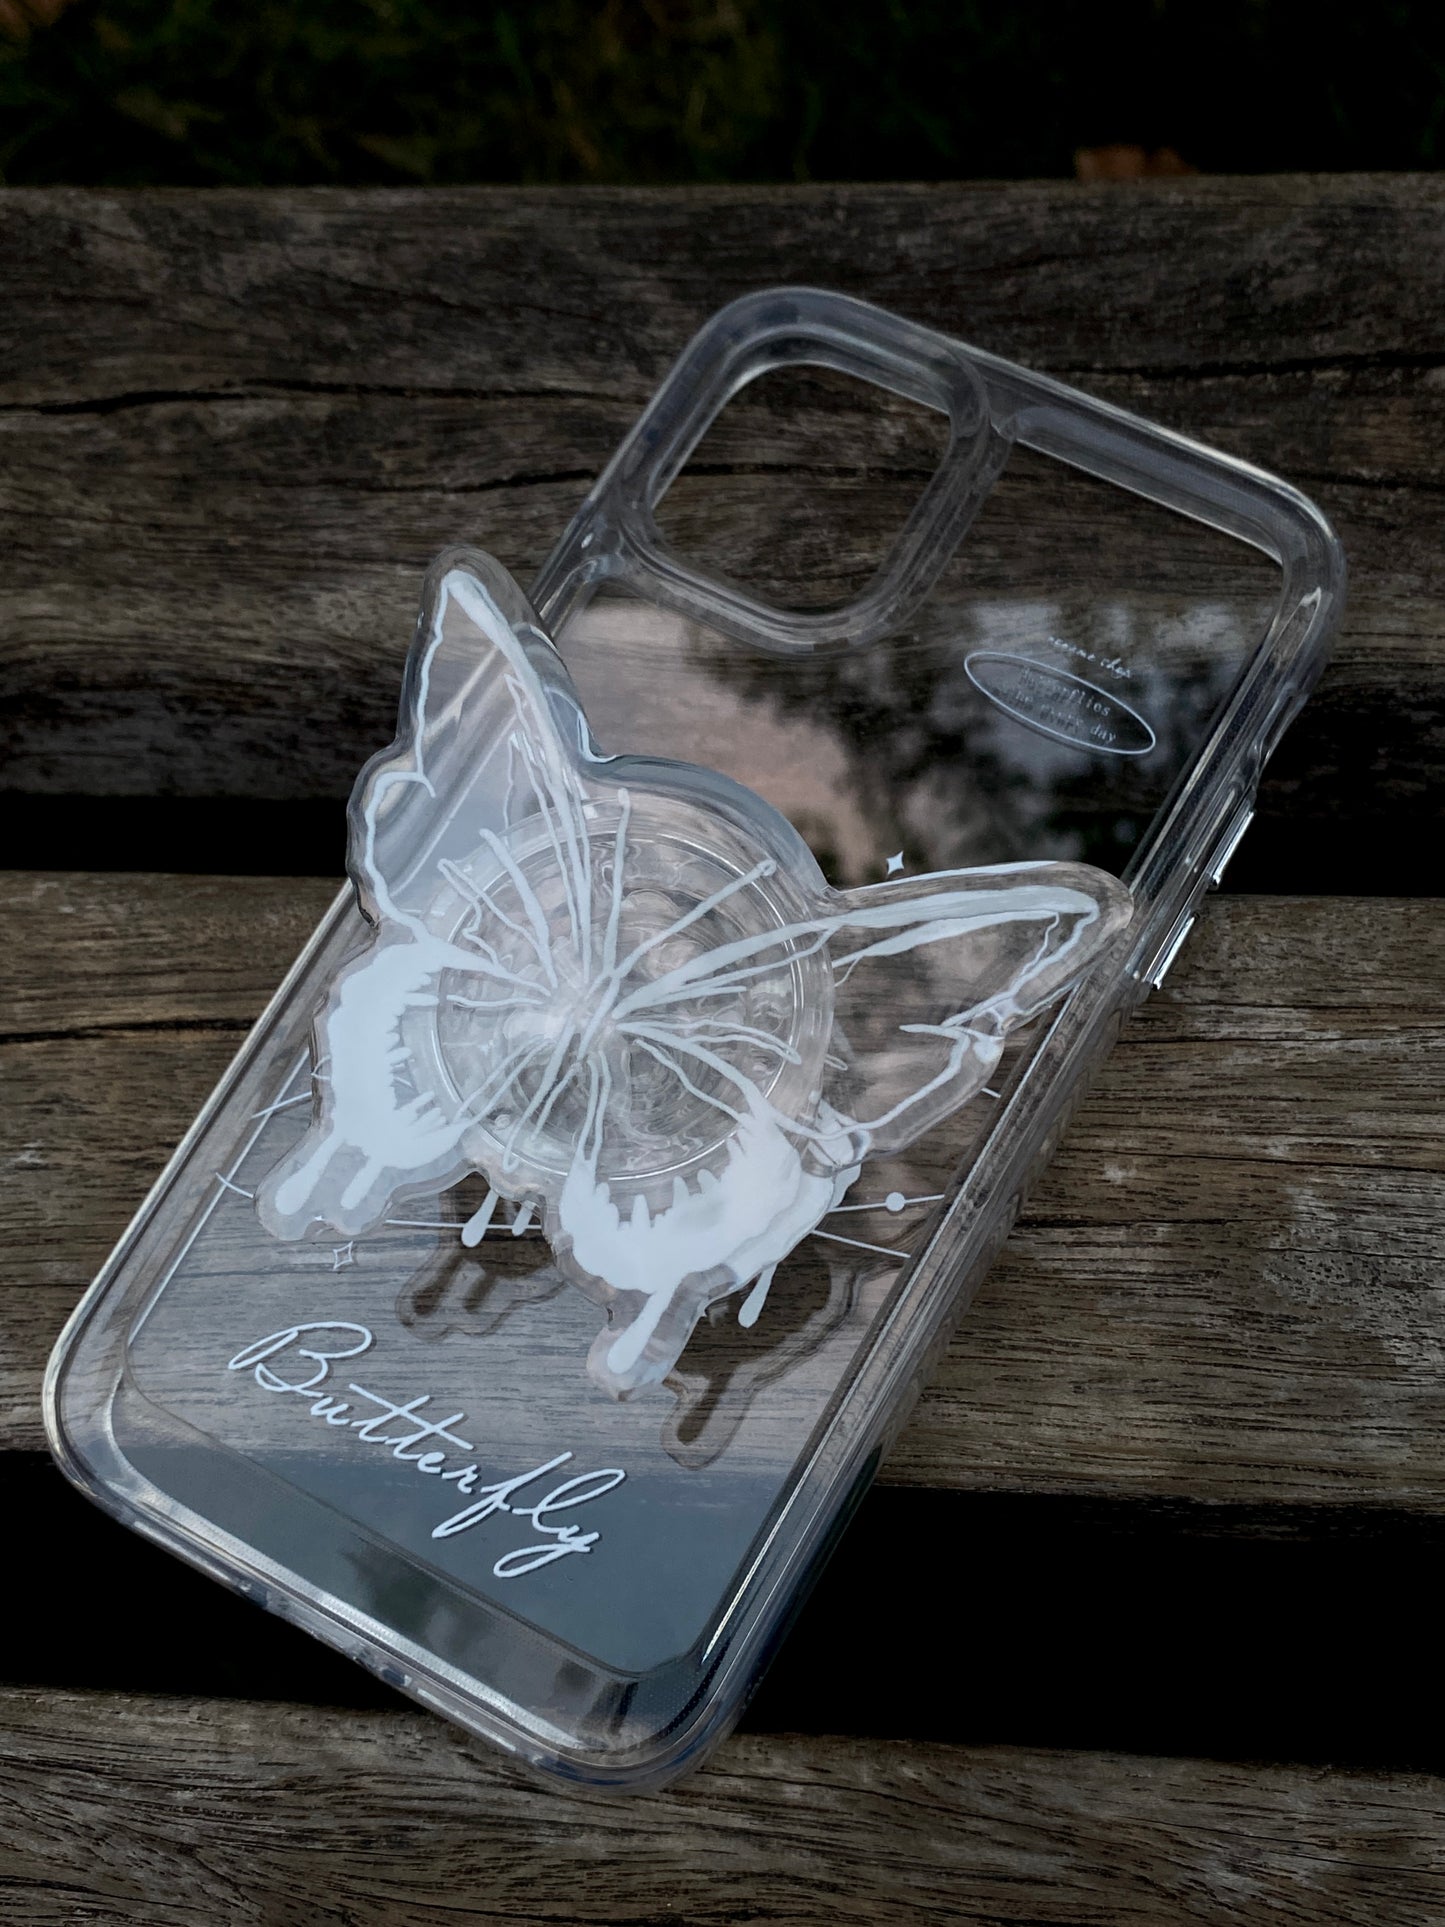 Butterfly Printed Phone Case